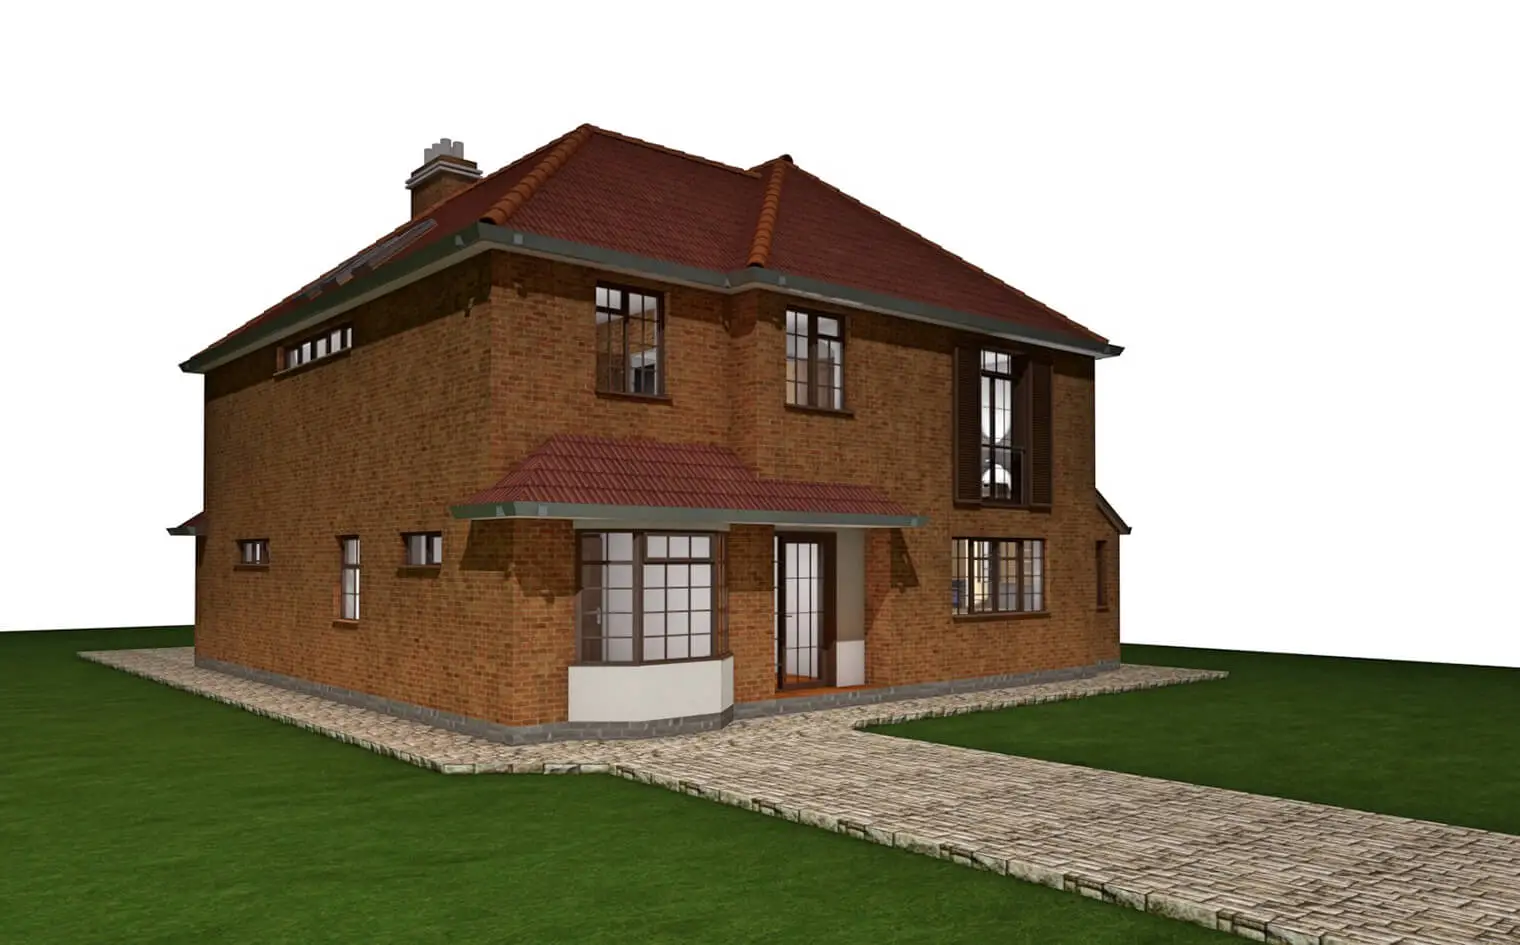 3D architectural drawing of detached house